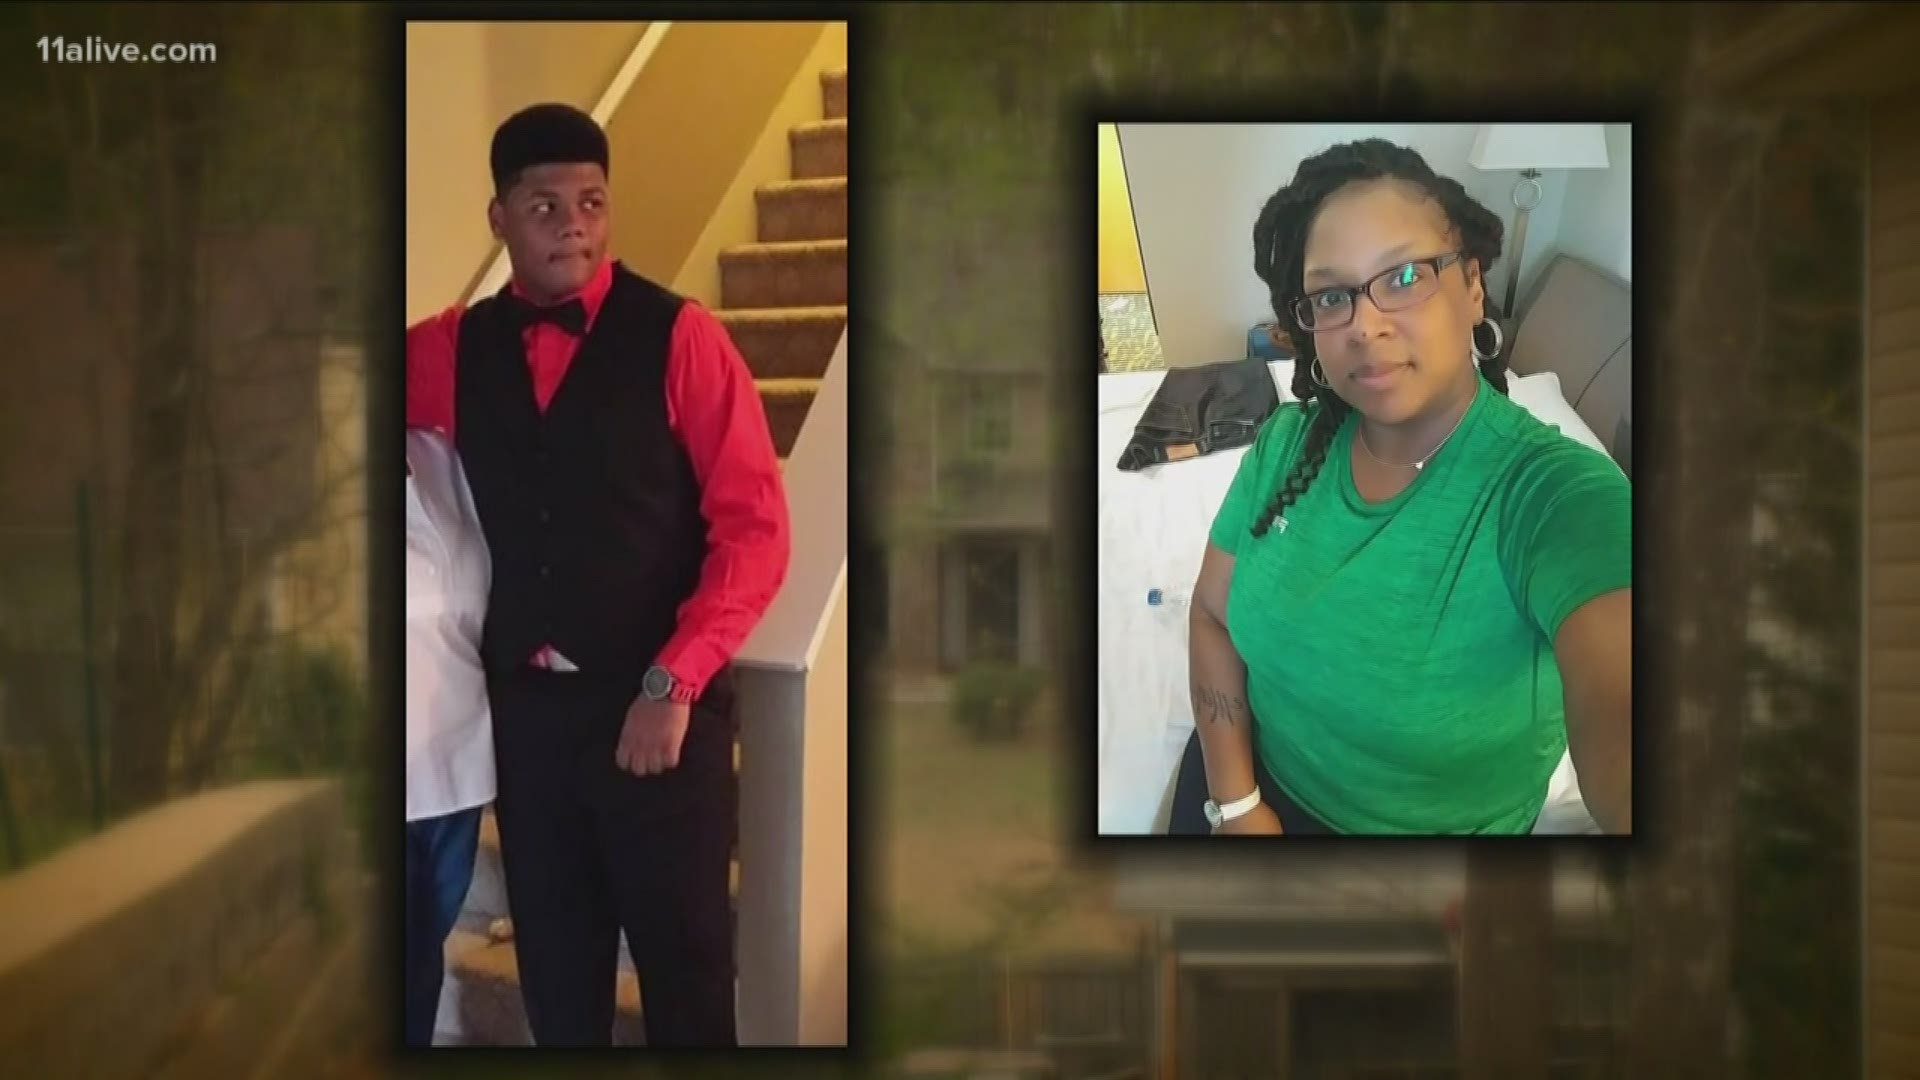 Sandra White and her 16-year-old son Arkeyvion White were found shot to death at a home in Stockbridge. White's boyfriend turned the gun on himself after a 15-hour standoff with police.